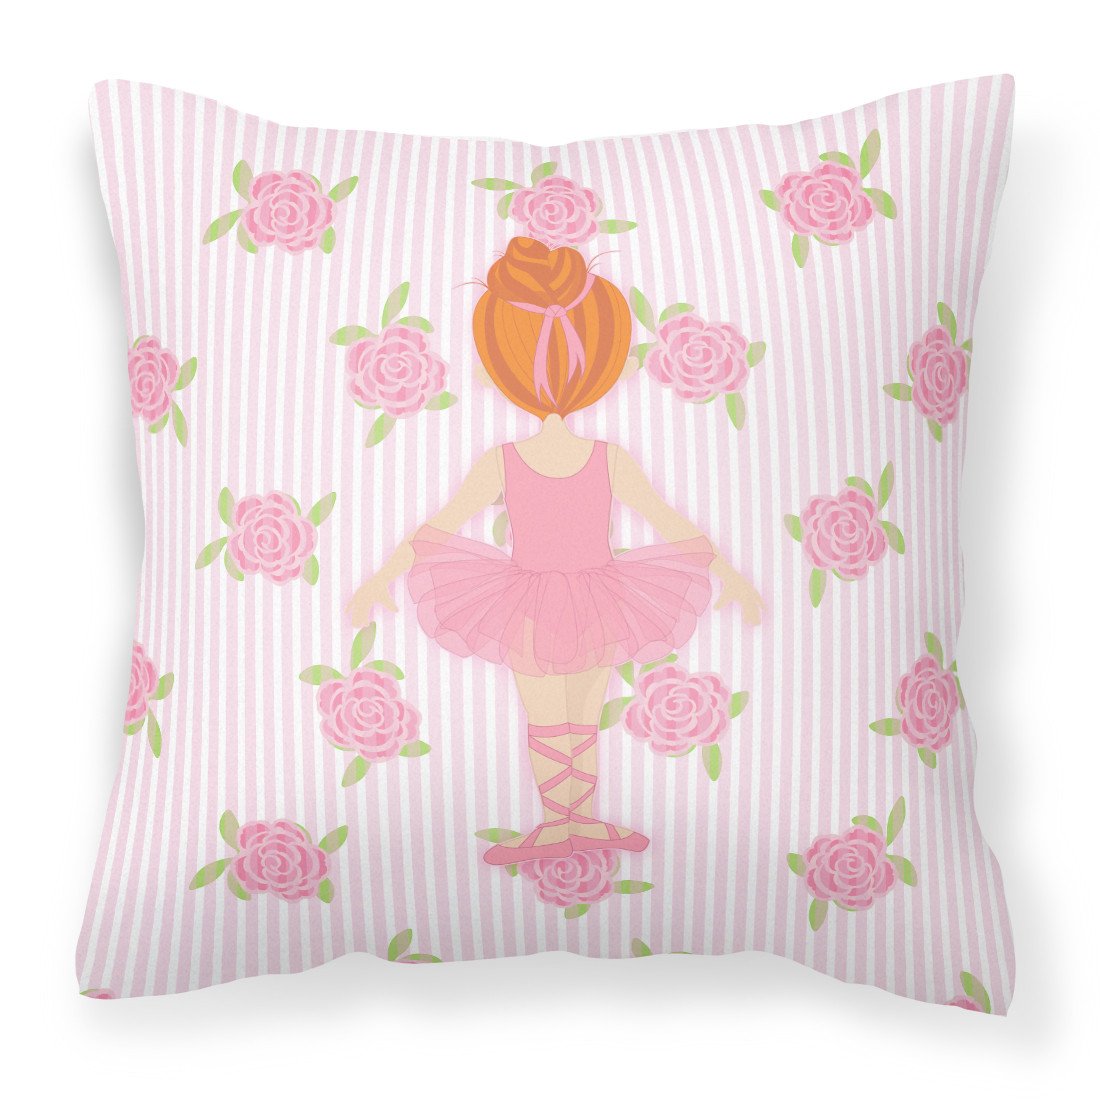 Ballerina Red Head Back Pose Fabric Decorative Pillow BB5163PW1818 by Caroline's Treasures